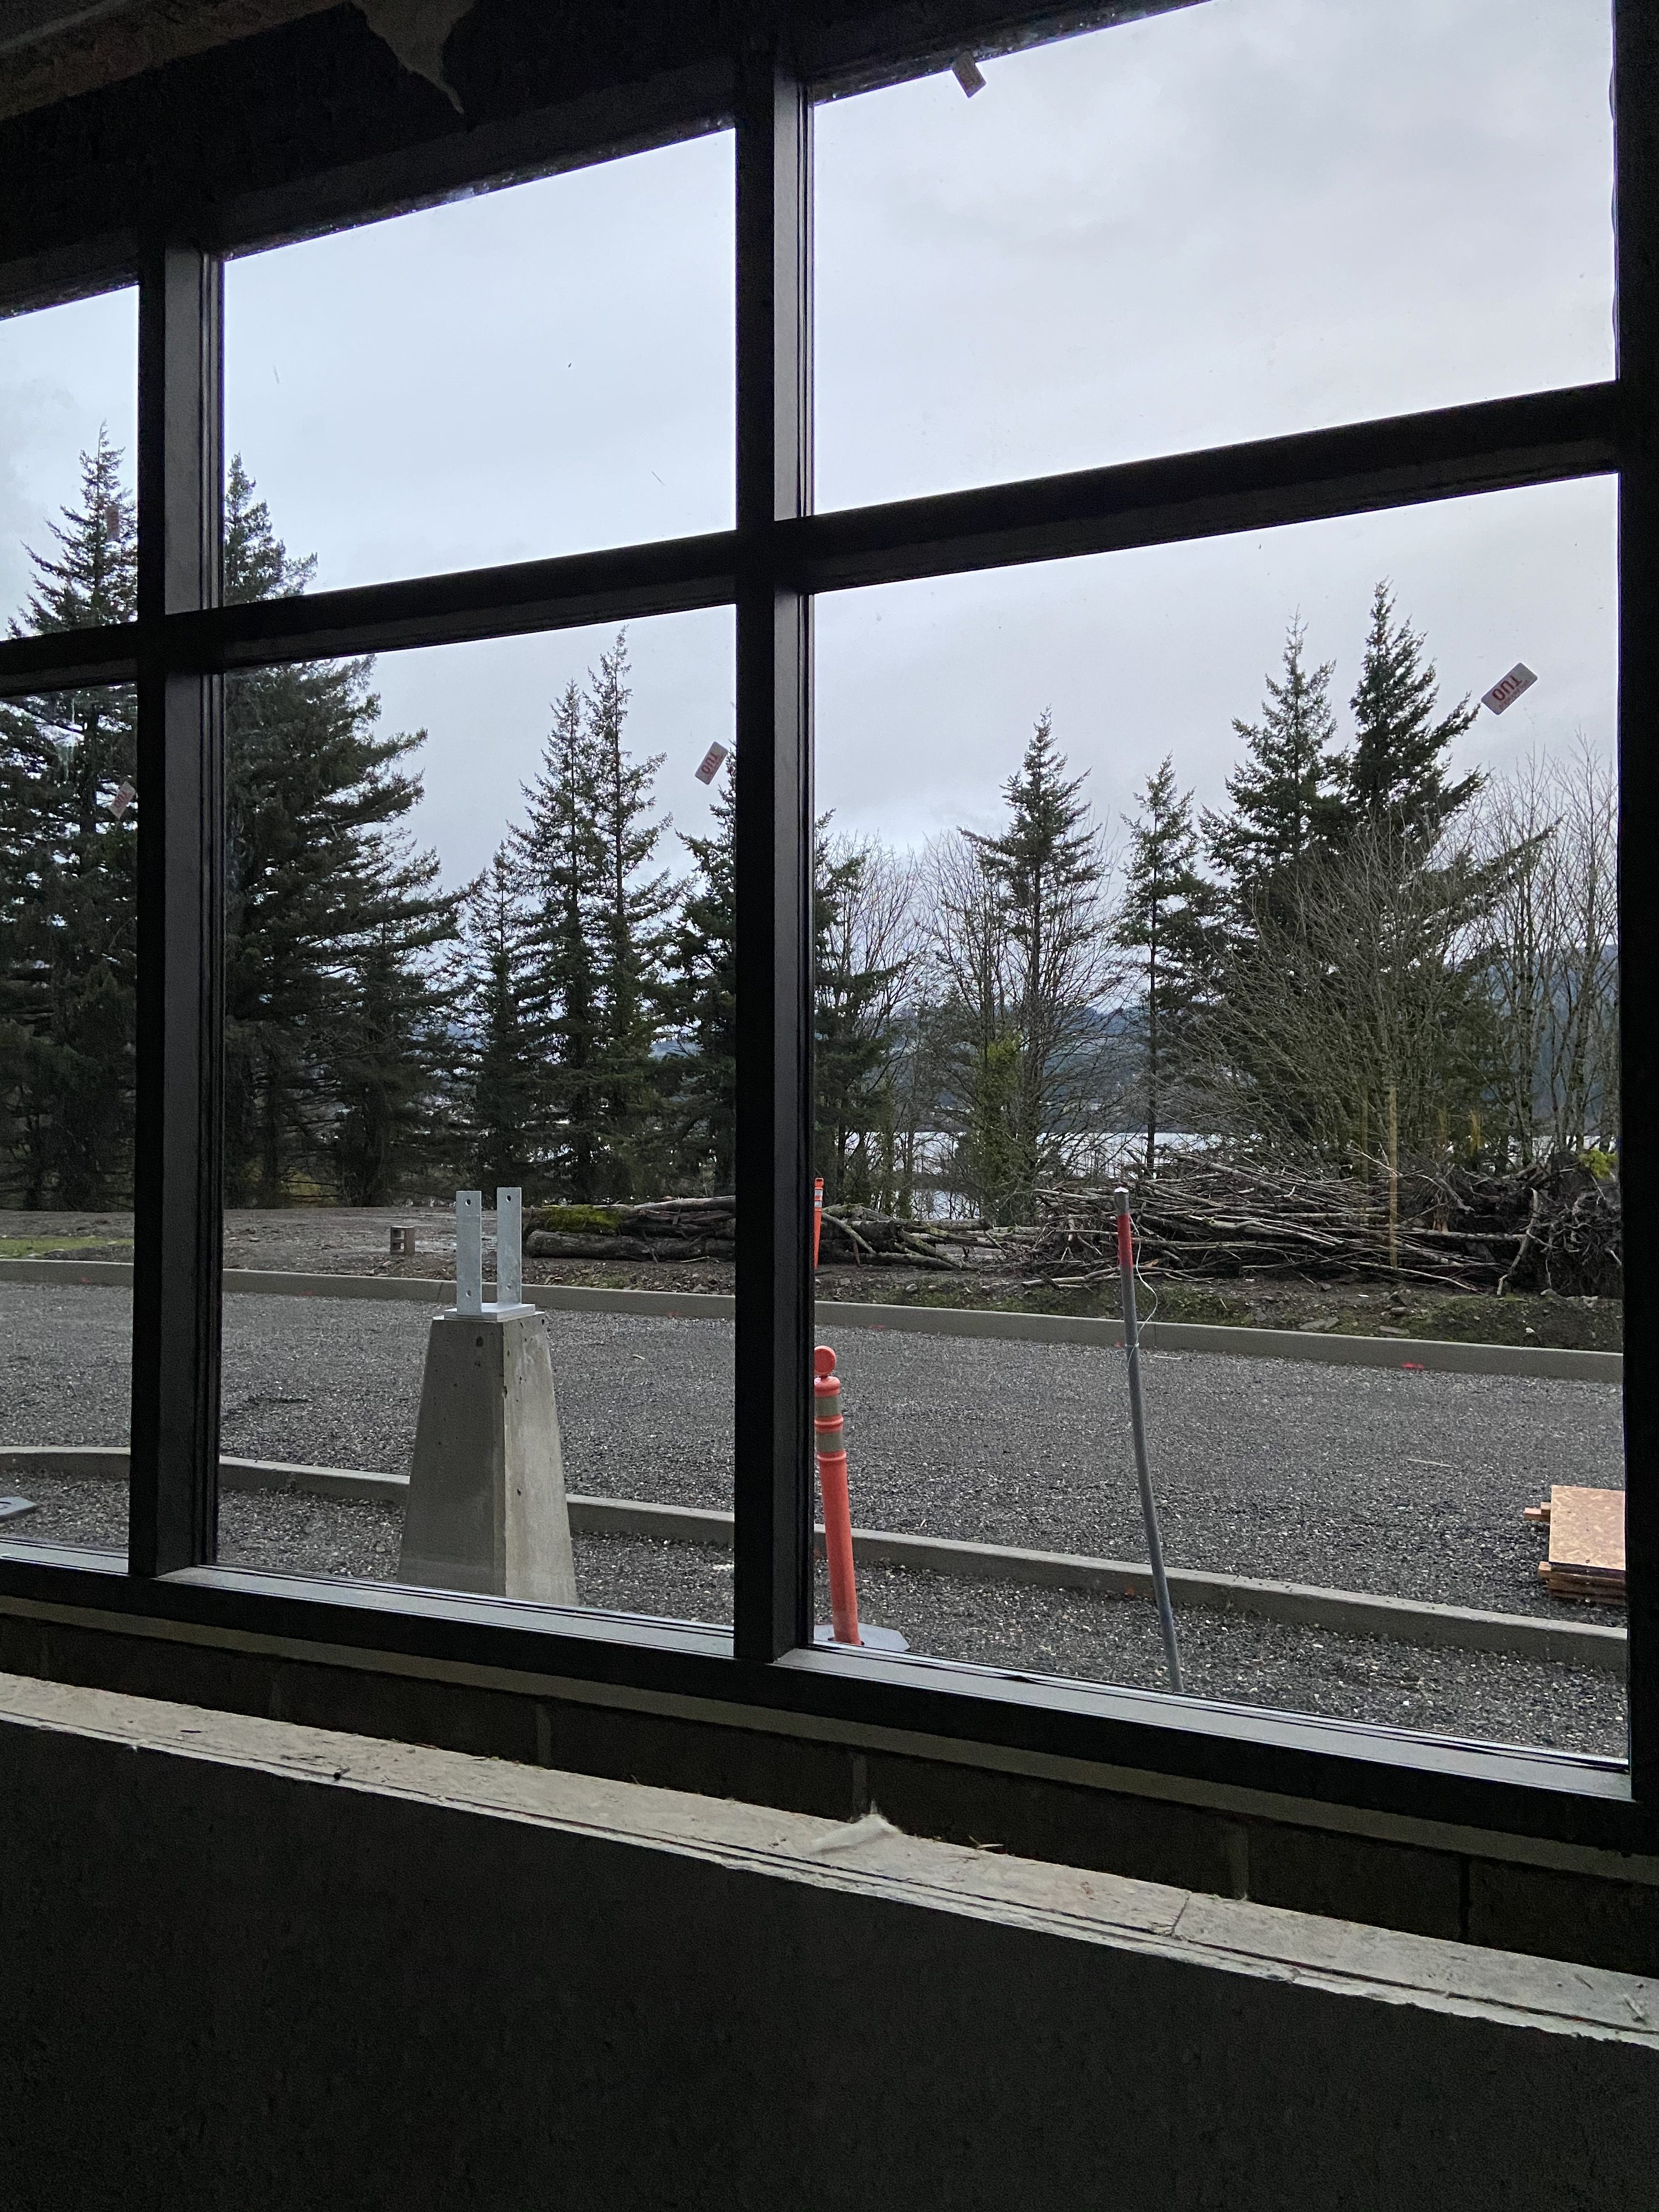 Large windows face the north with views of the Columbia River at the forthcoming pFriem Family Brewers location in Cascade Locks, Oregon.